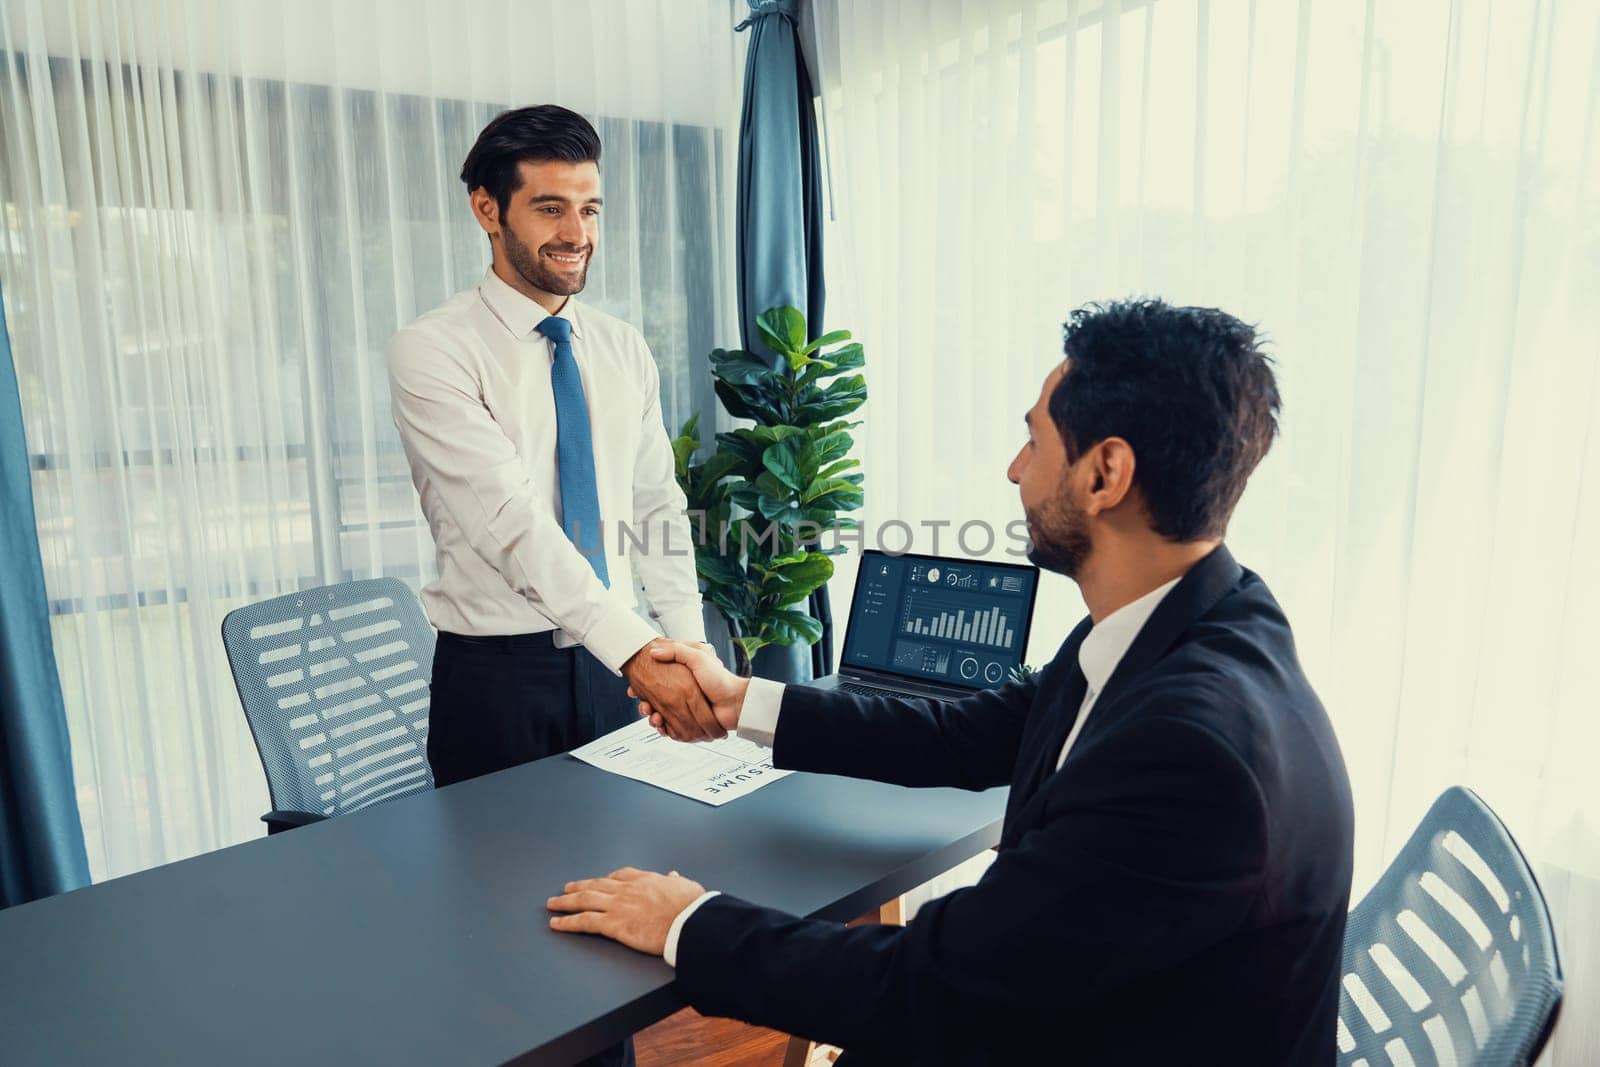 Successful job interview at business office with handshake. Positive discussion of qualifications and application for position. Job hiring concept between candidate and interviewer. Fervent